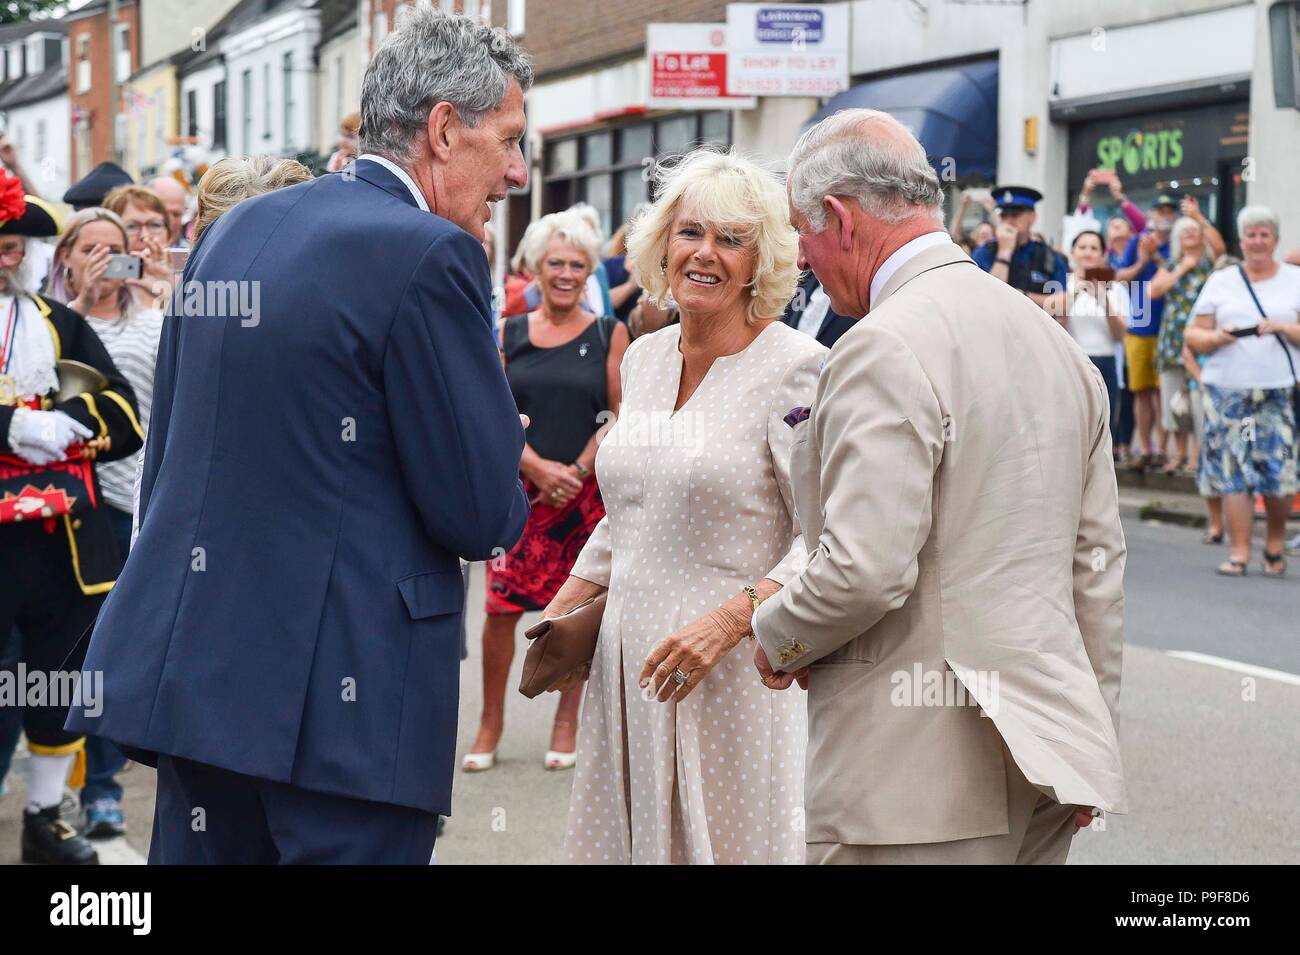 Honiton, Devon, UK.  18th July 2018.   The Duke and Duchess of Cornwall visit the Gate to Plate food market at Honiton in Devon.  The Royal couple arrive.  Picture Credit: Graham Hunt/Alamy Live News Stock Photo